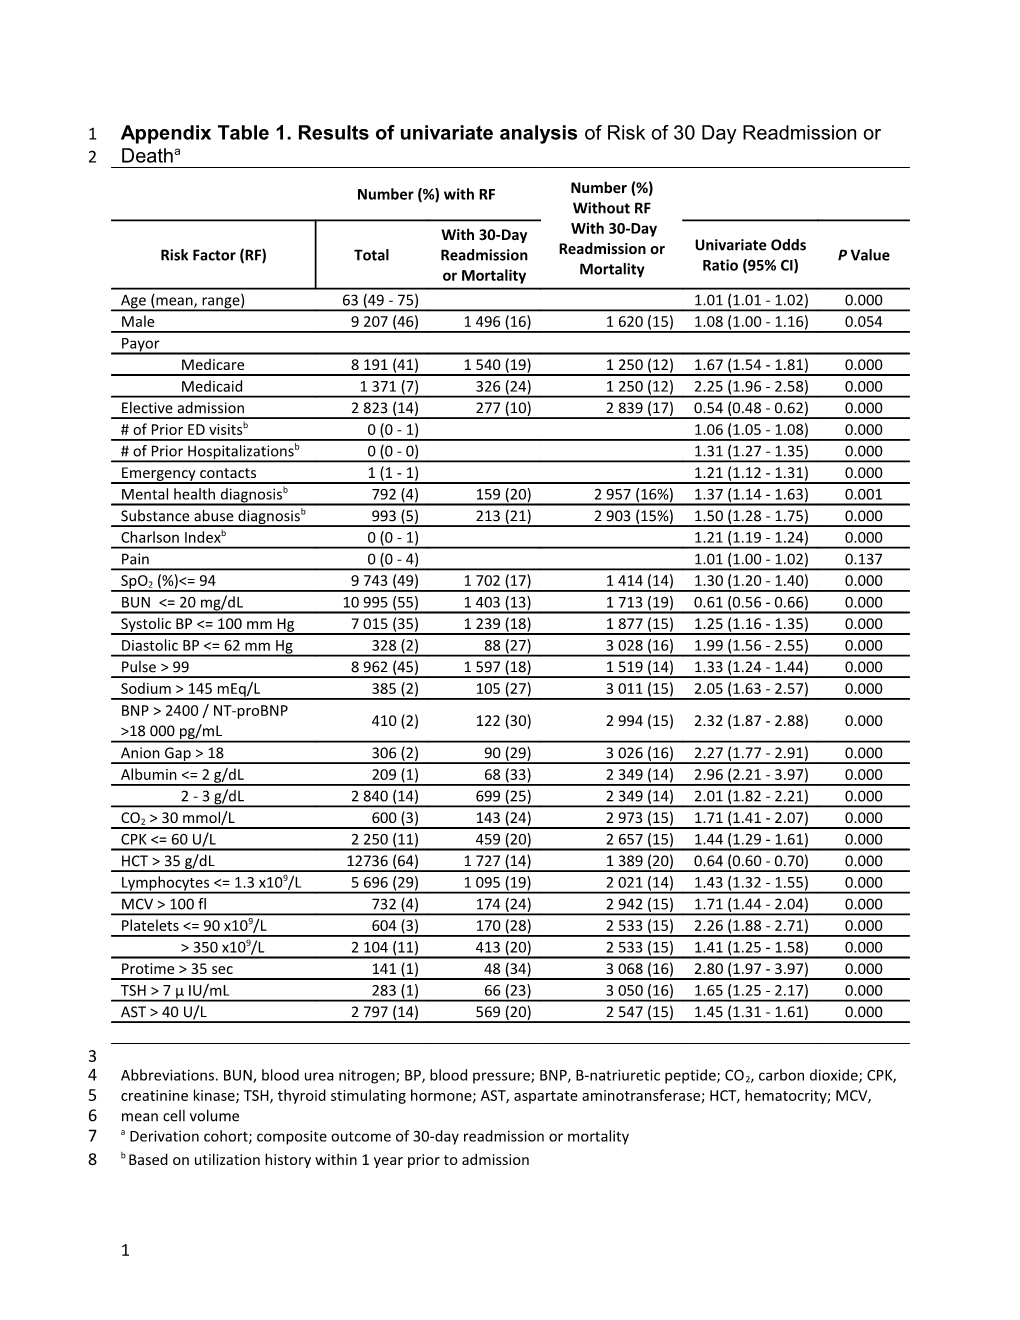 Appendix Table 1. Results of Univariate Analysis of Risk of 30 Day Readmission Or Deatha